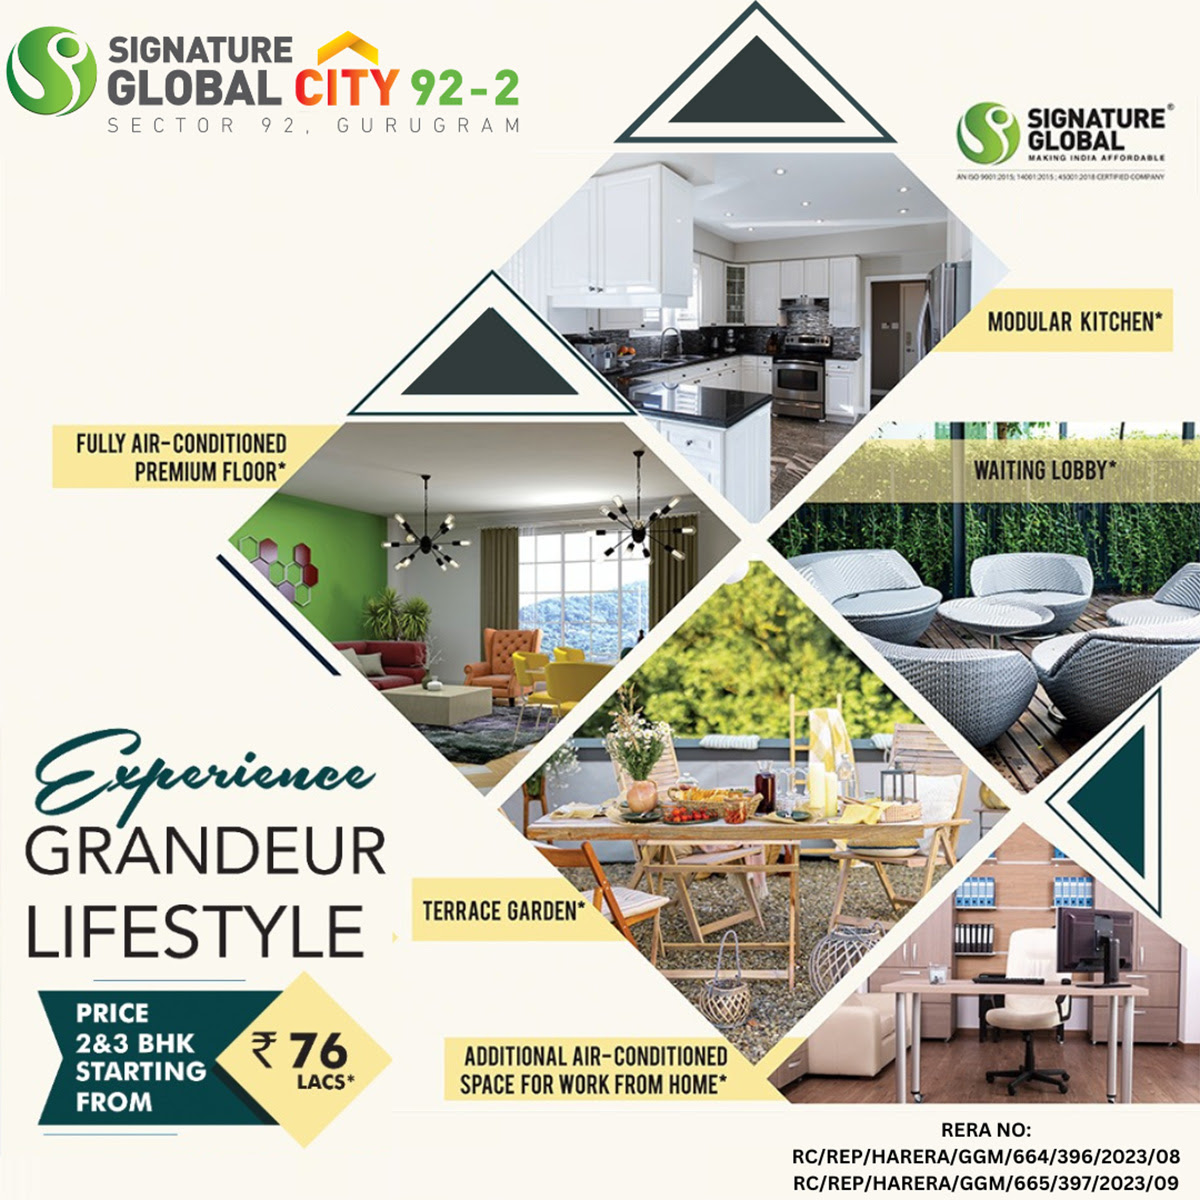 Book with Rs 1 Lac & get benefit of Rs 4 Lac at Signature Global City 92-2, Gurgaon